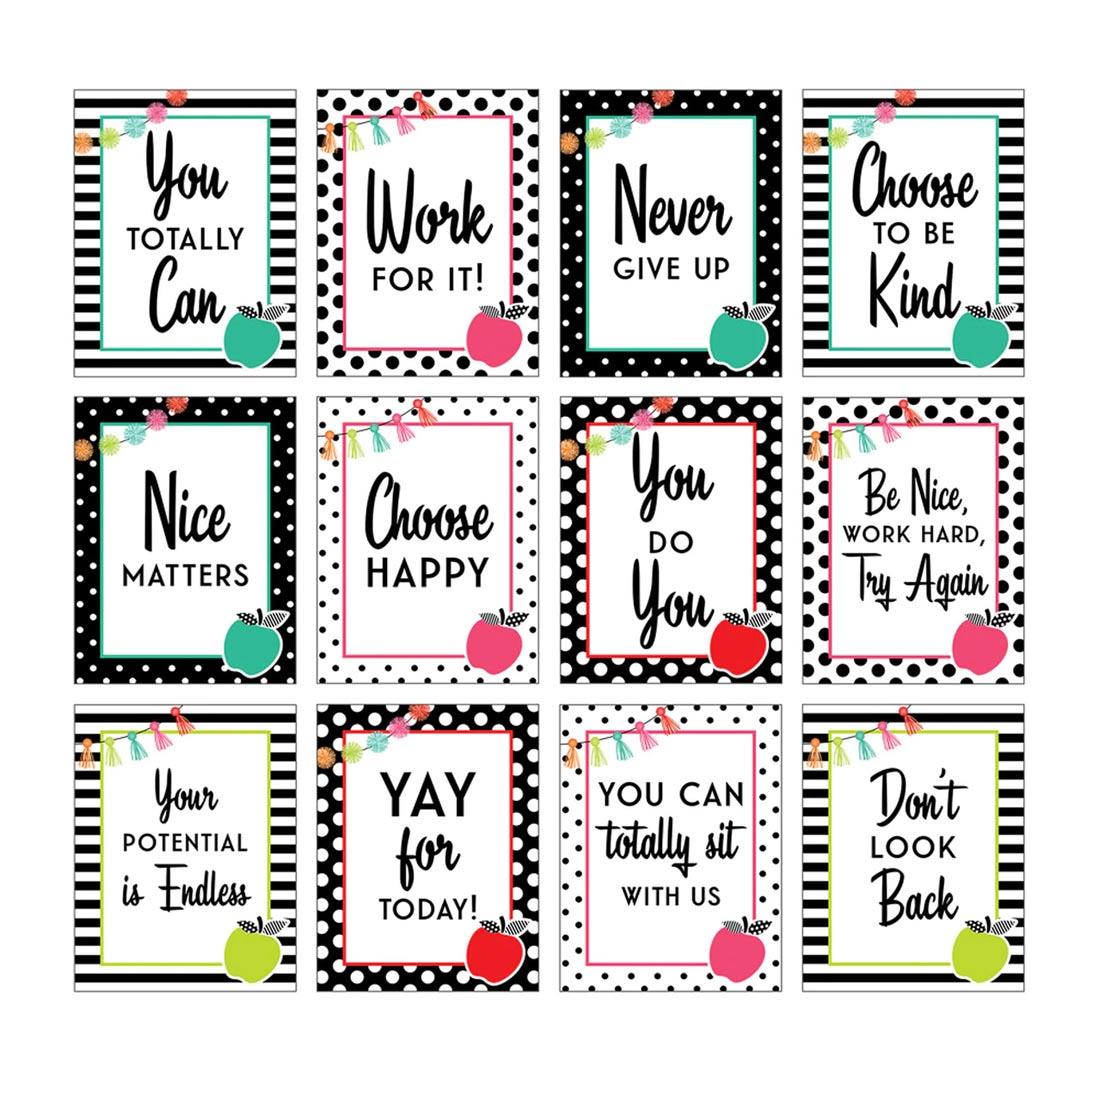 Mini Poster Set with sayings like You Totally Can, Work For It, Never Give Up, Choose to be Kind, etc.